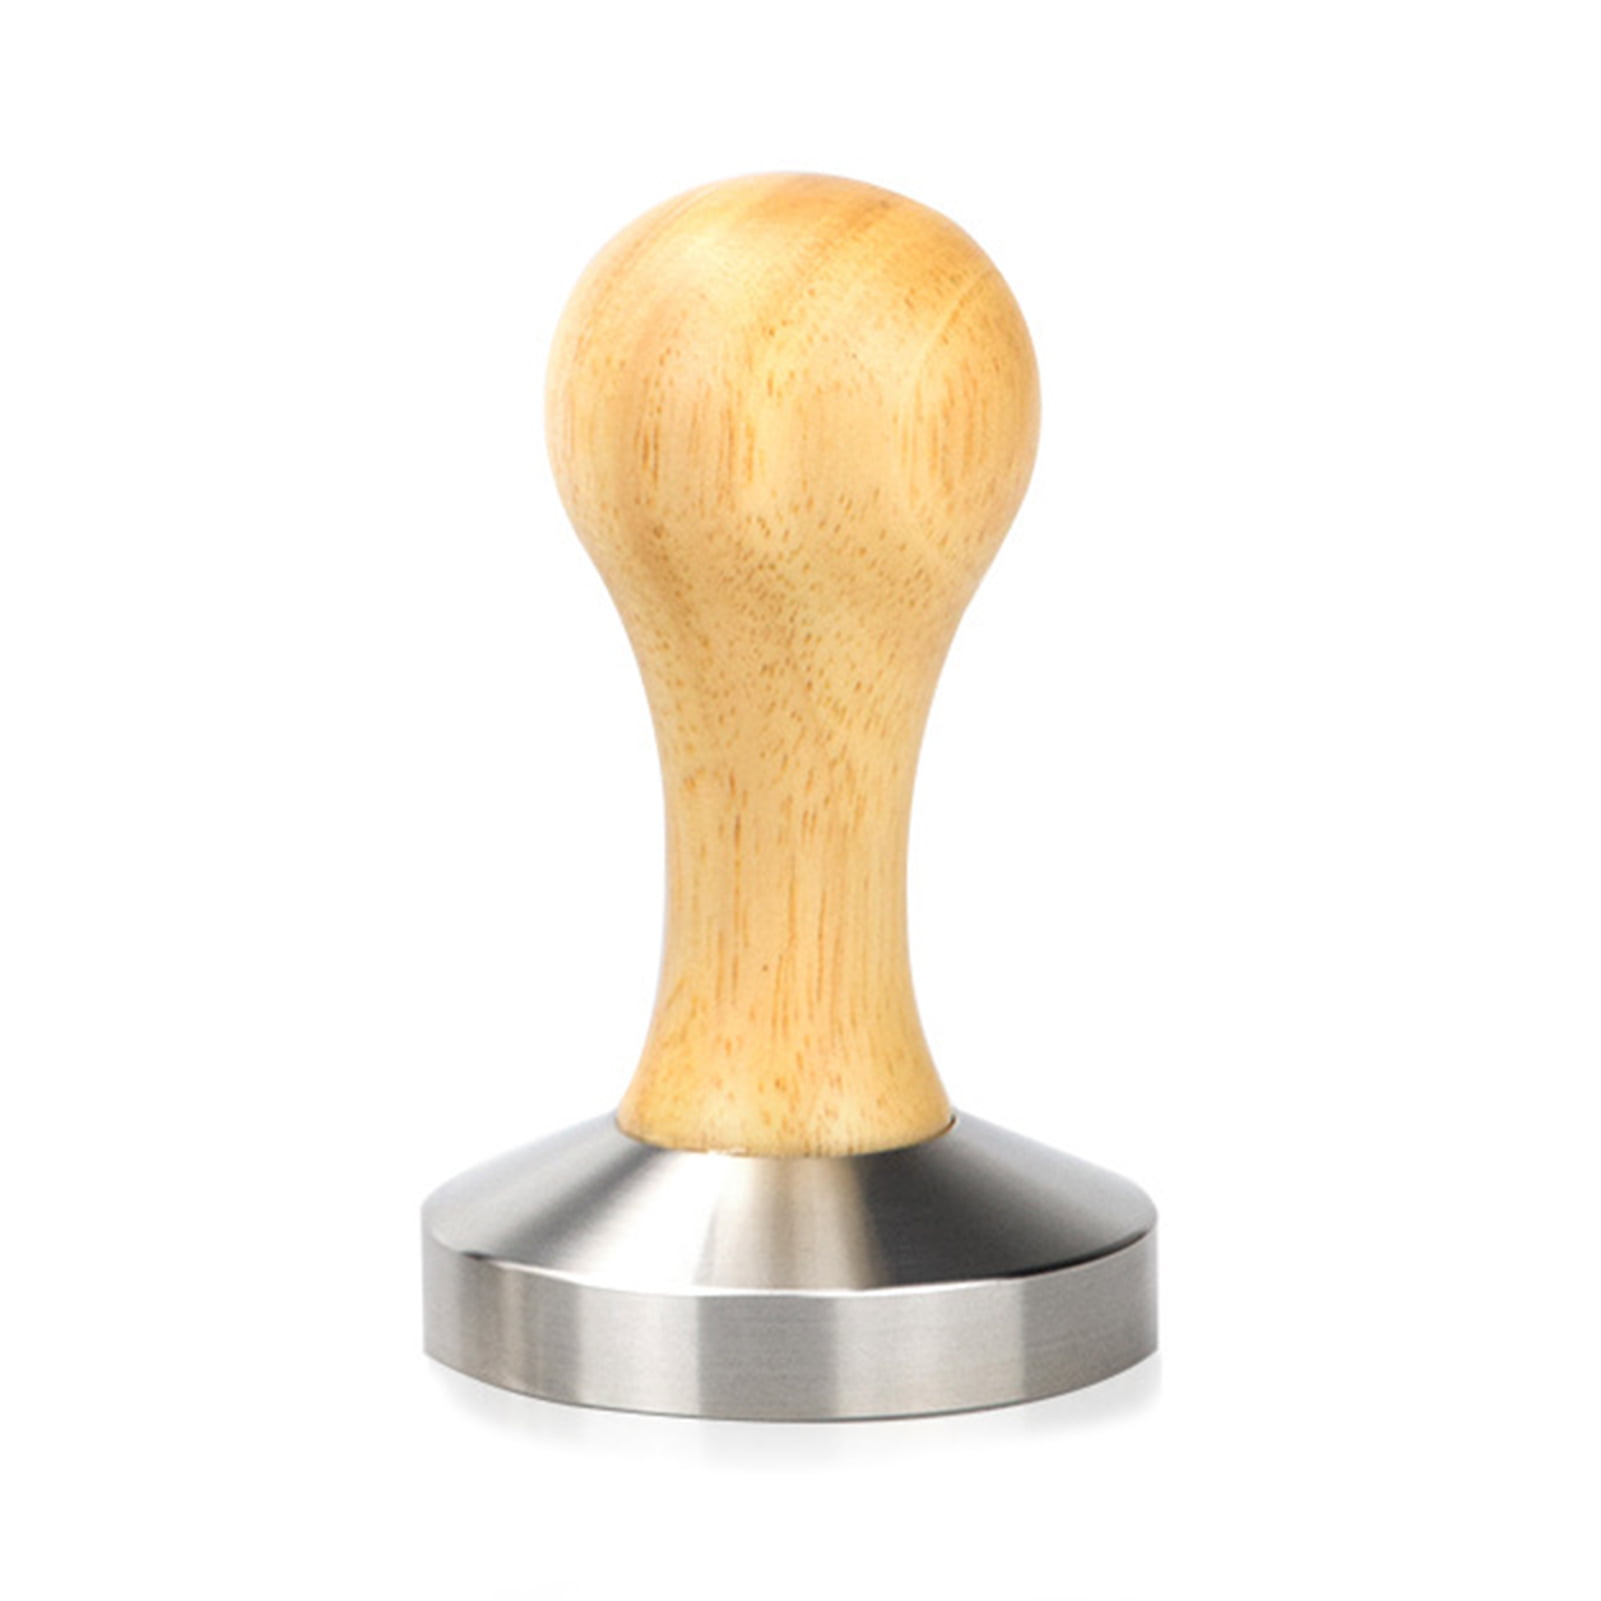 Details about   STAINLESS STEEL TAMPER PRESS 57mm BASE WOODEN HANDLE COFFEE MAKER MACHINE 